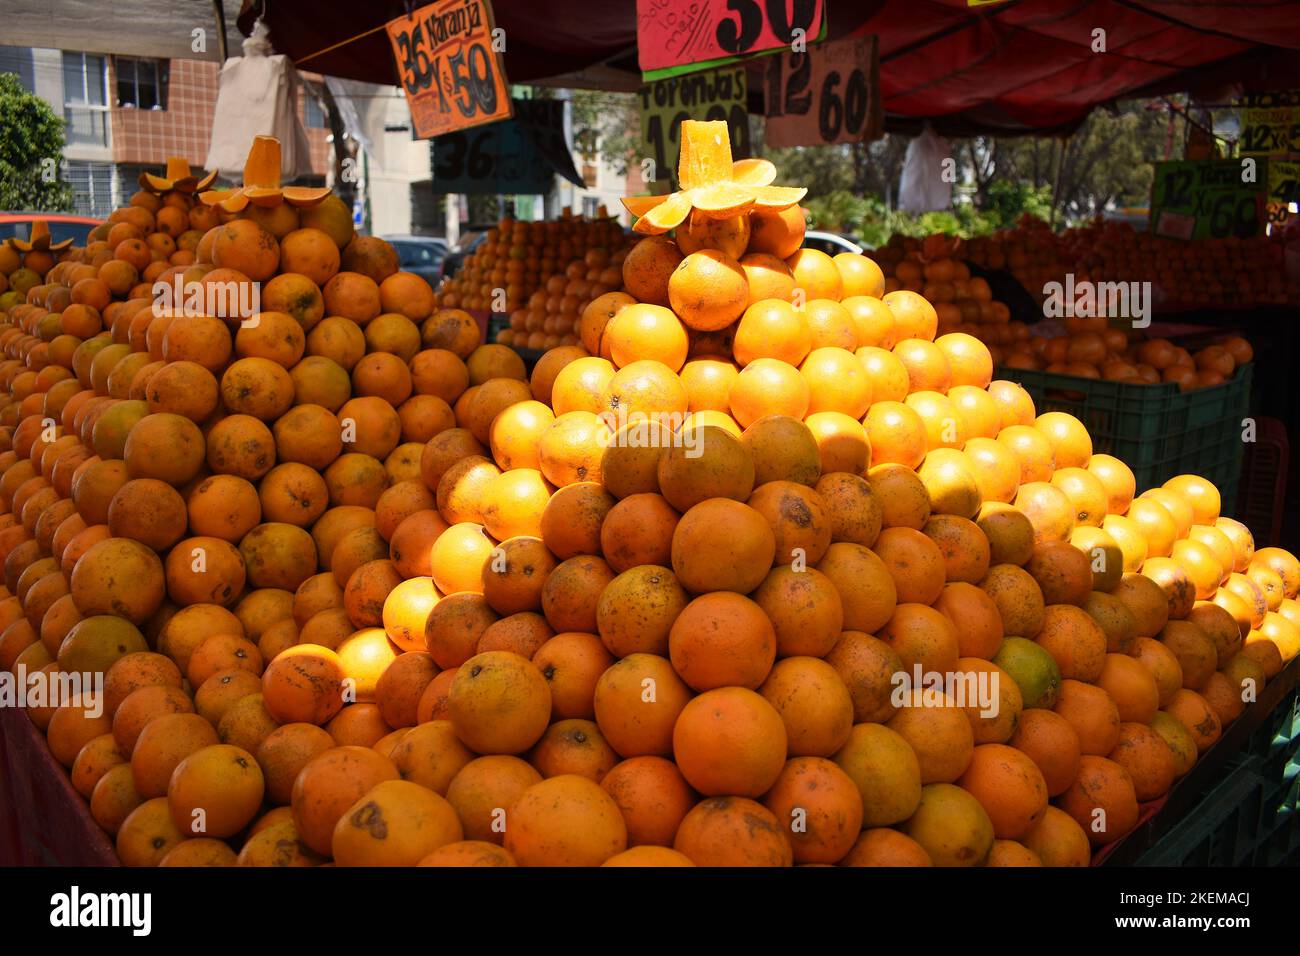 Oranges in a mexican market Stock Photo